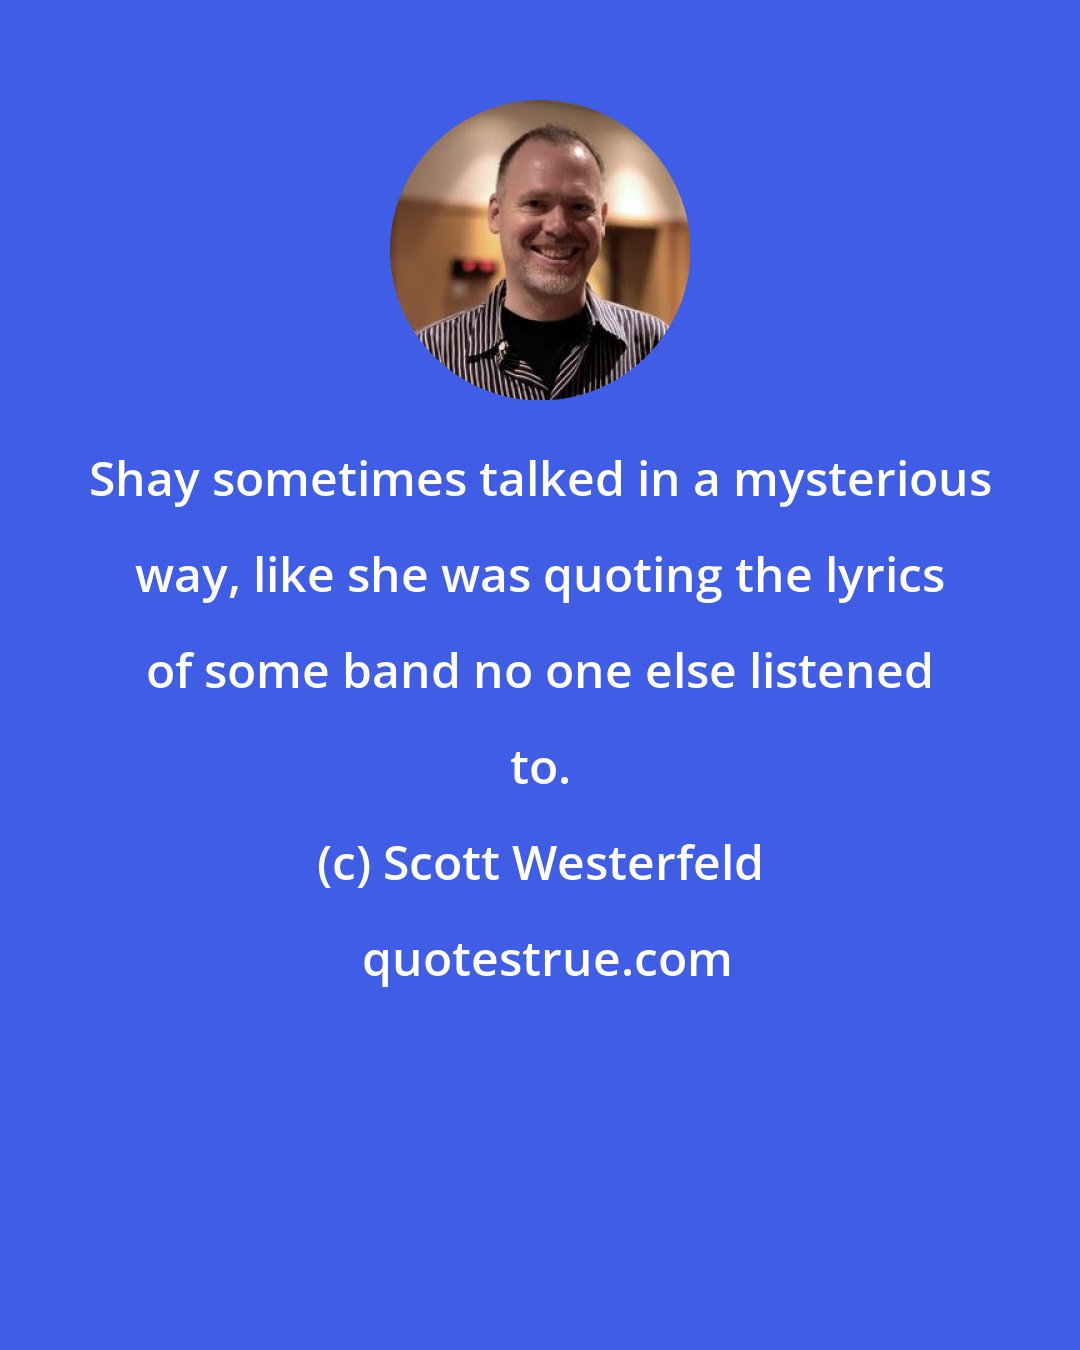 Scott Westerfeld: Shay sometimes talked in a mysterious way, like she was quoting the lyrics of some band no one else listened to.